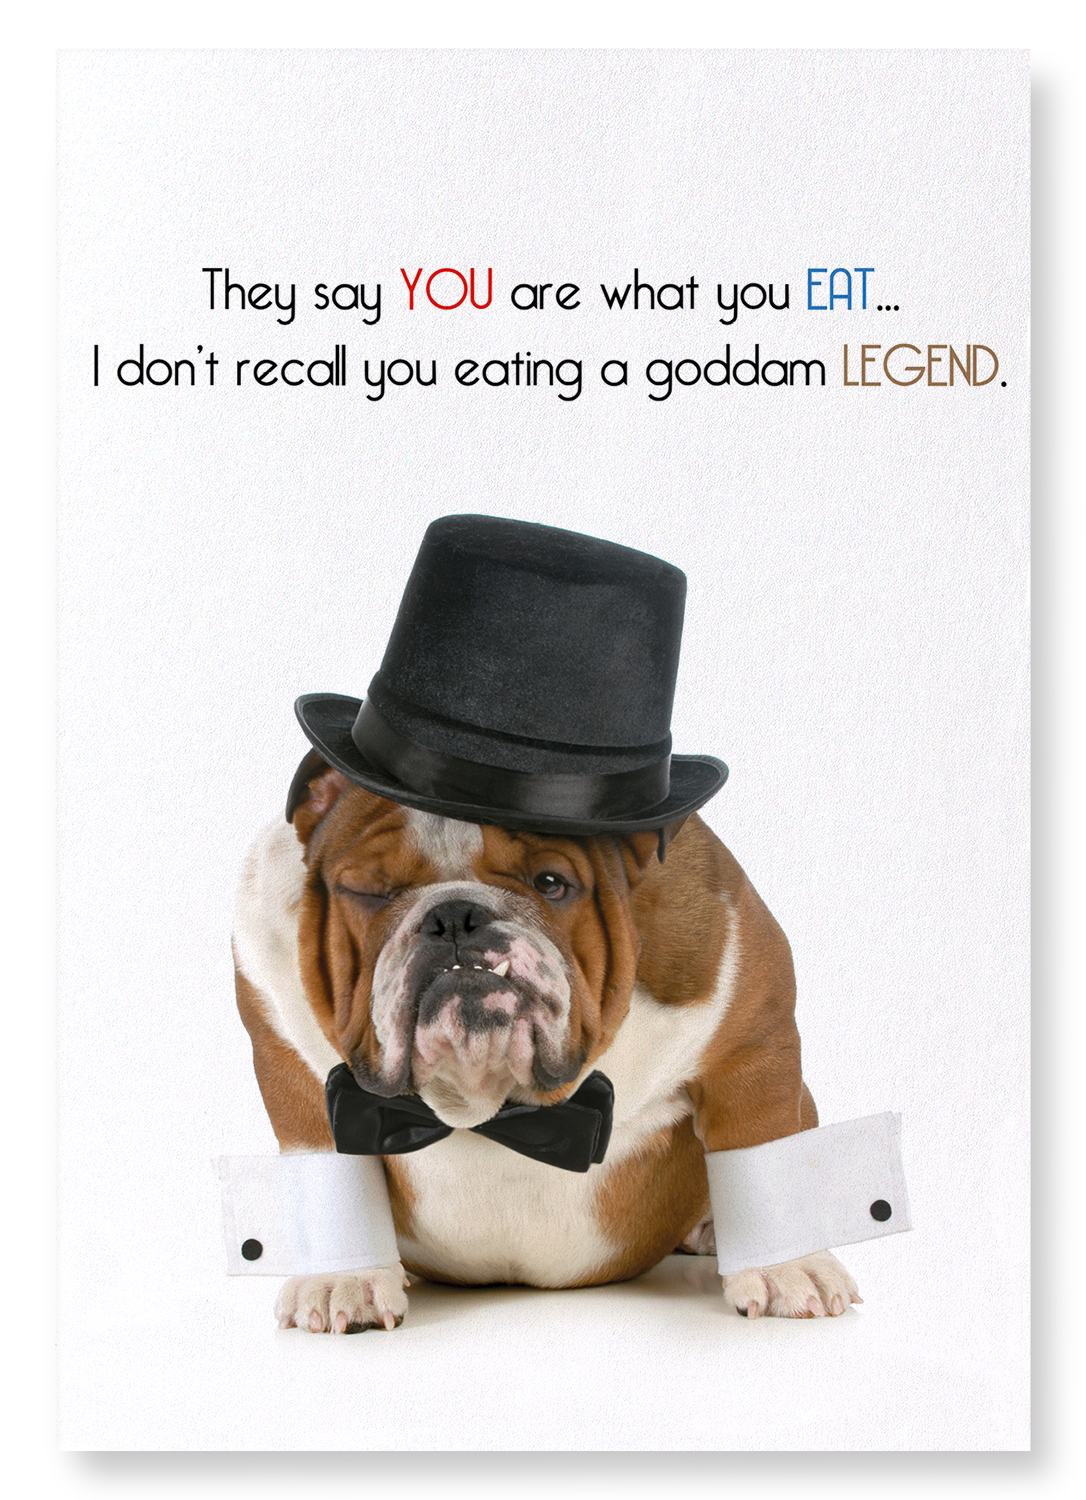 YOU ARE A LEGEND: Funny Animal Art print